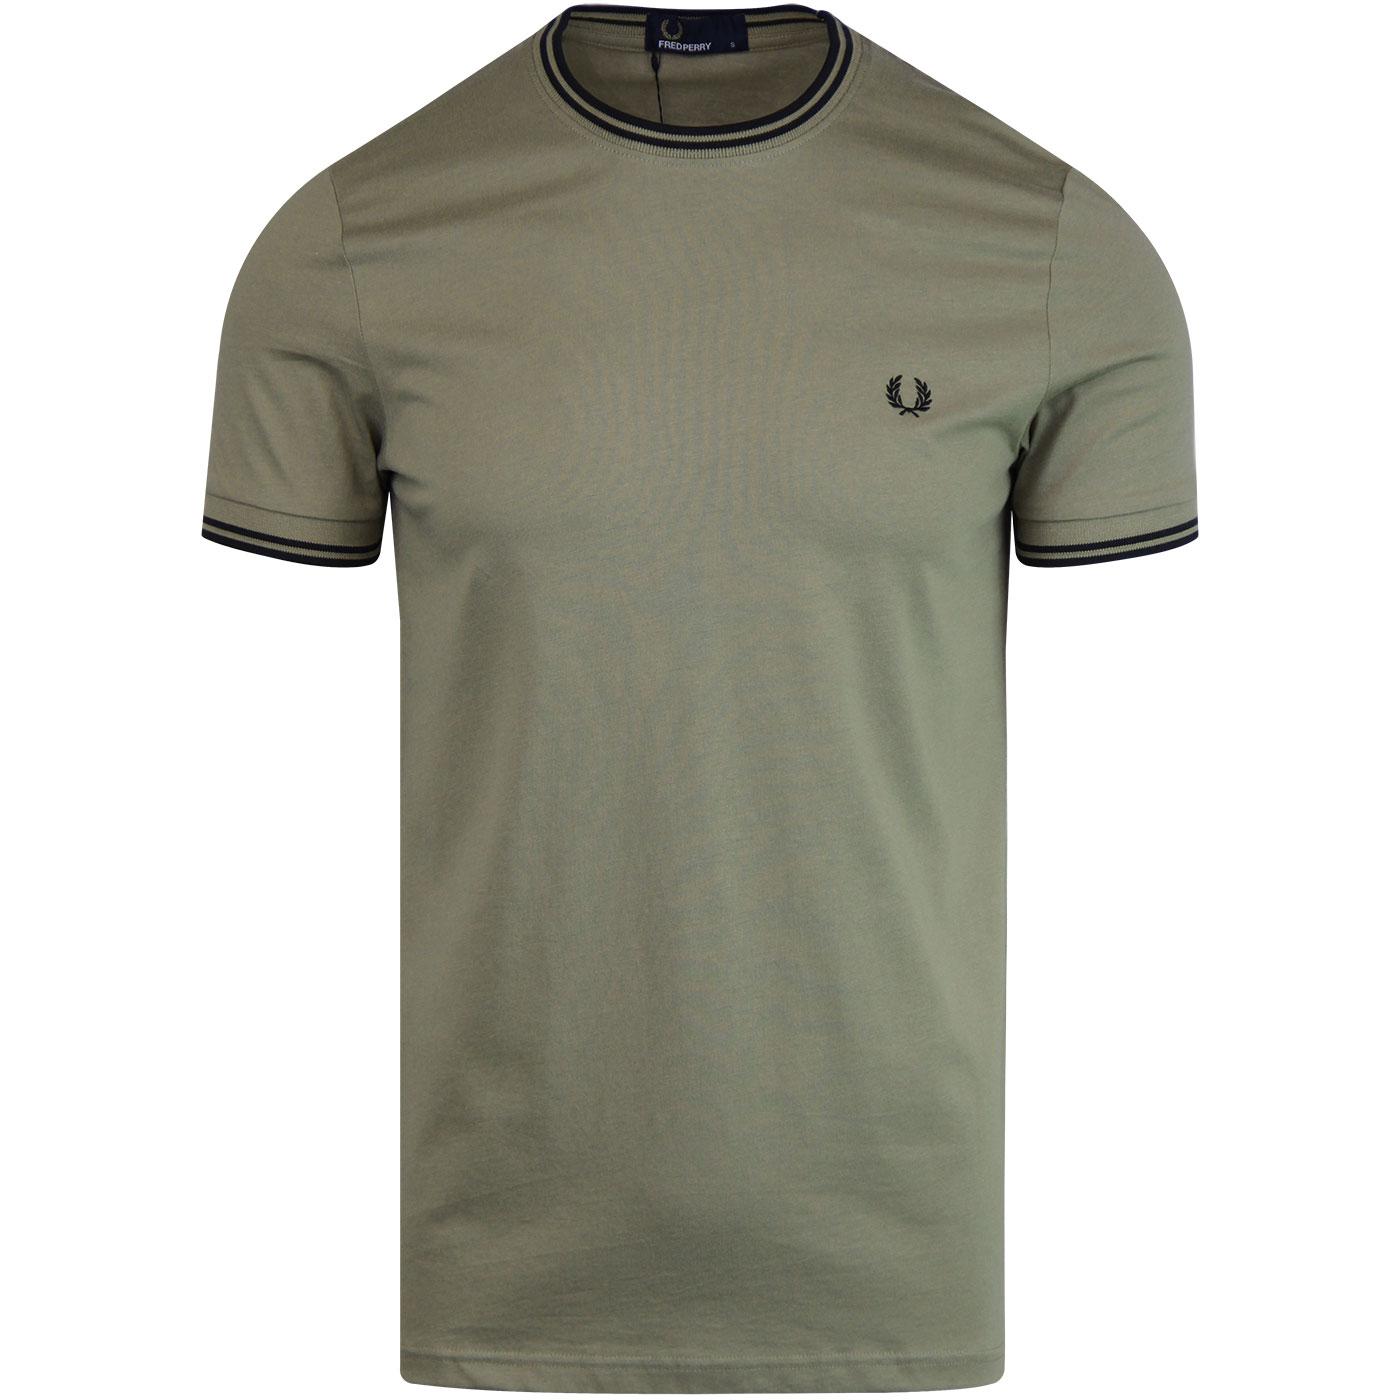 FRED PERRY Twin Tipped Mod Crew Neck T-Shirt SAGE